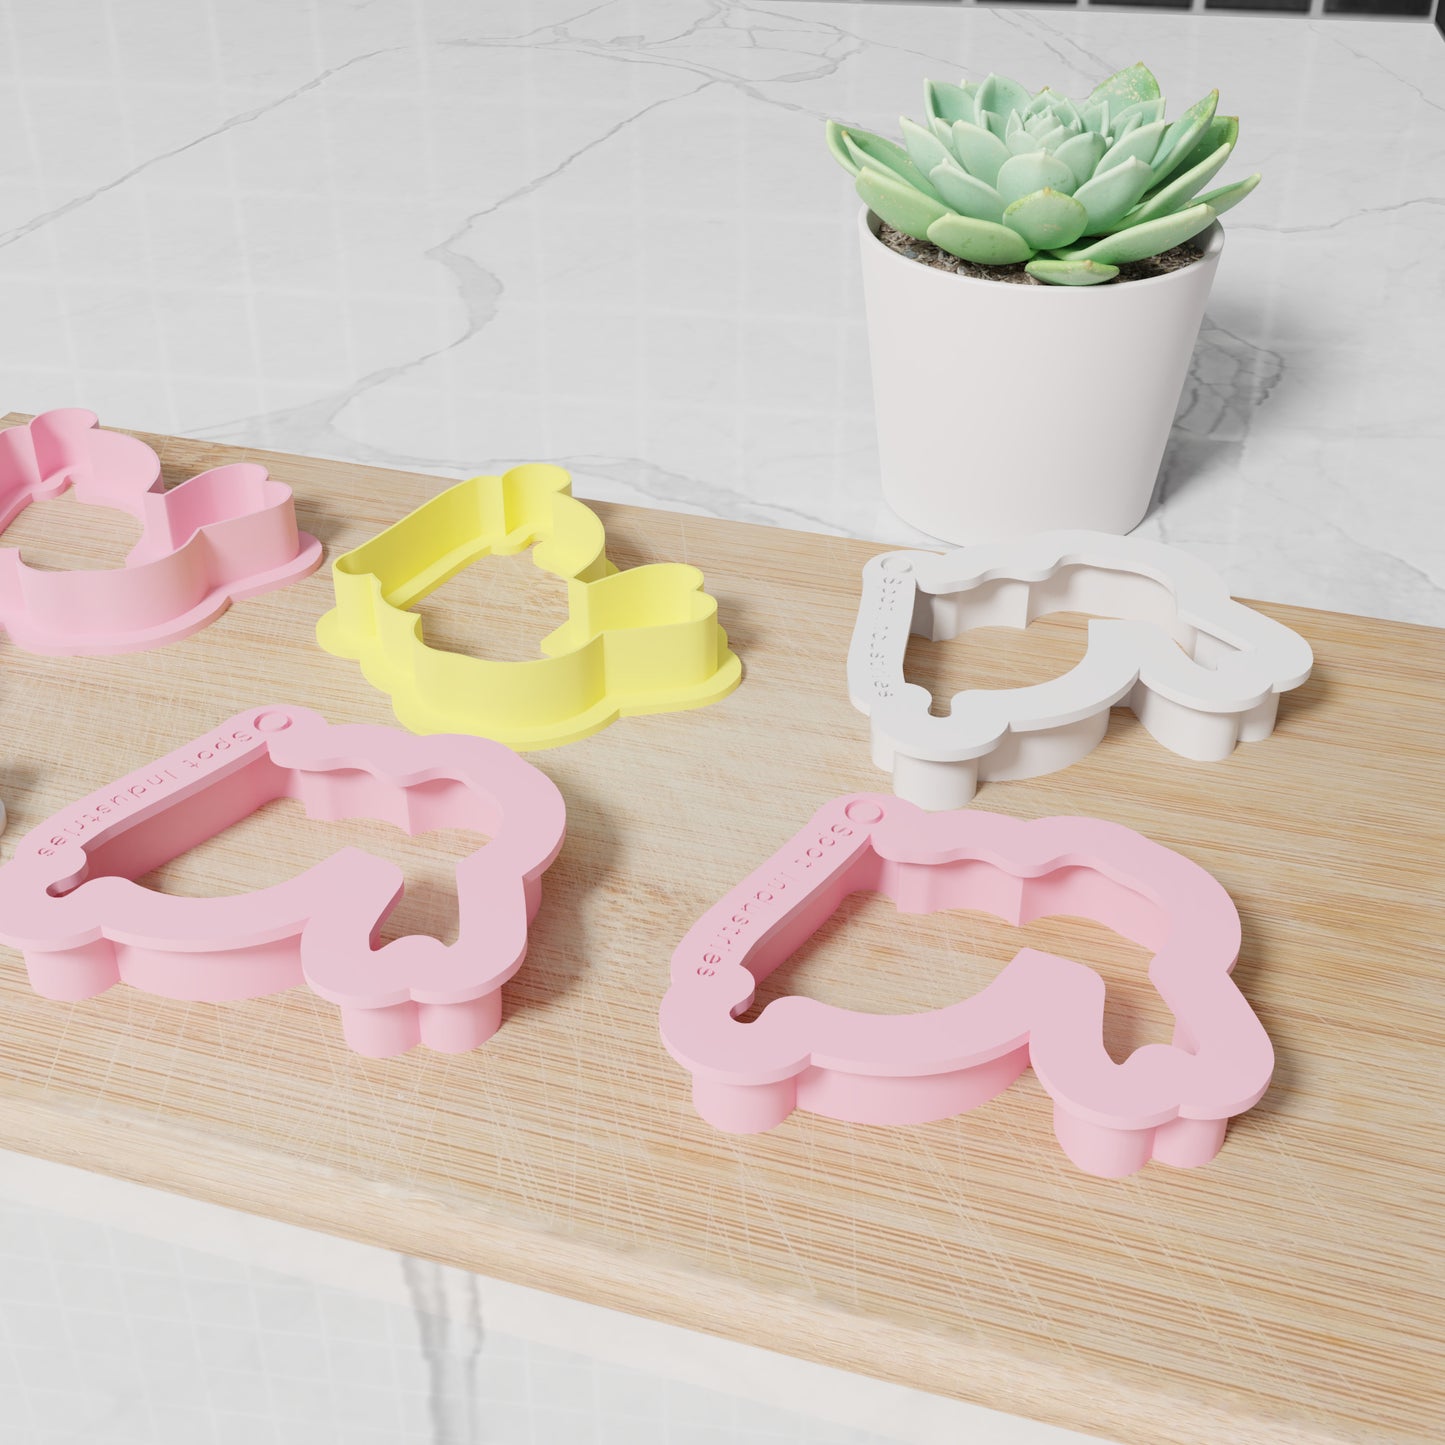 Easter Bunny Cookie Cutter Set. Matches Others In Our Easter Collection. Classic Side Profile Easter Bunny Cookie Cutter